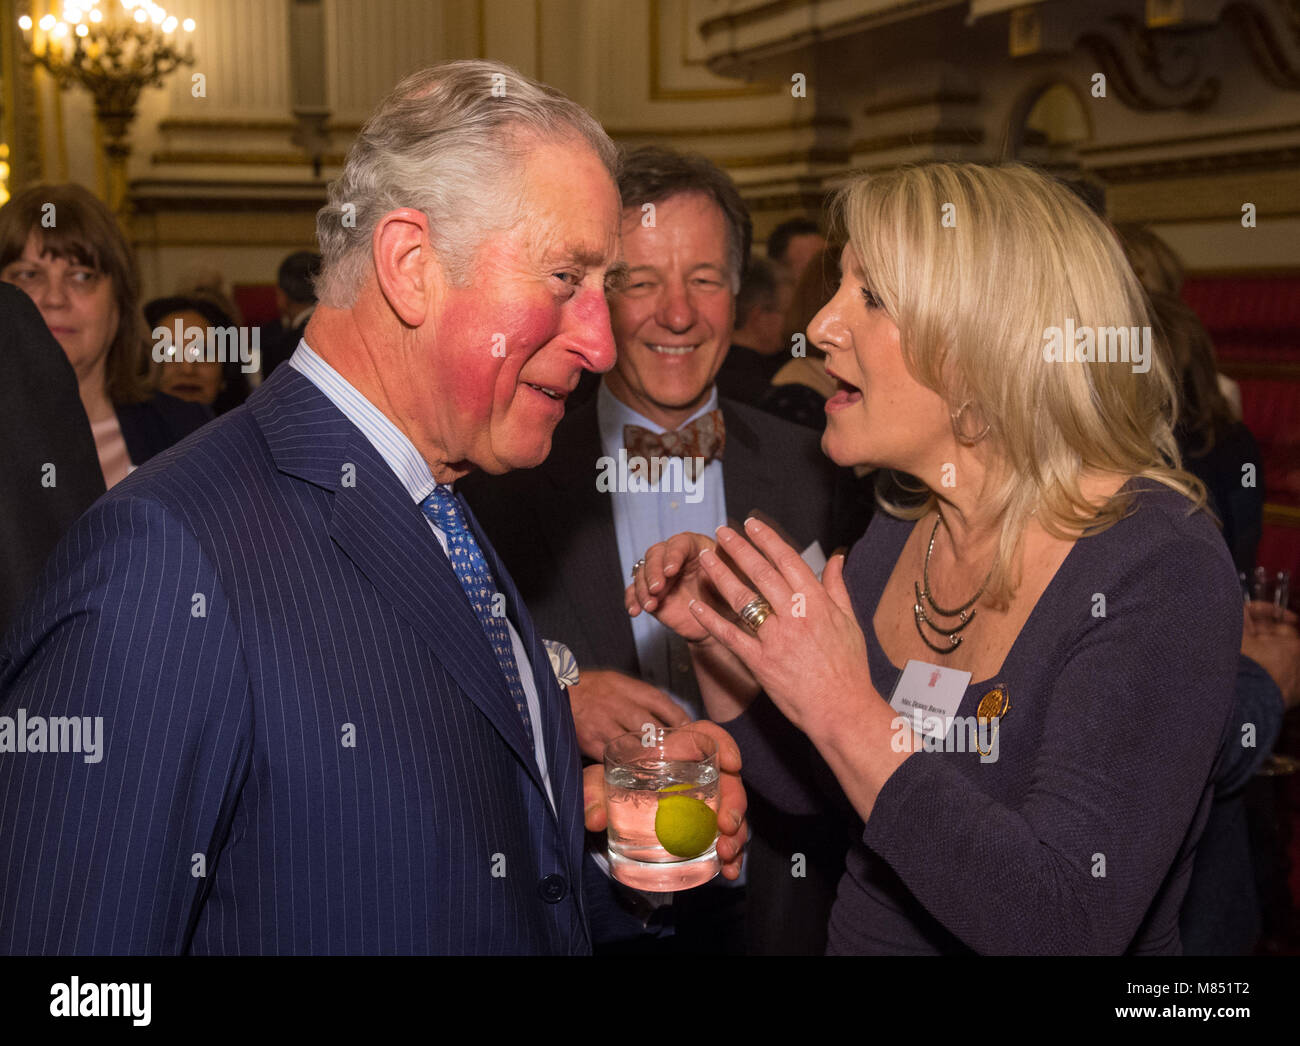 The Prince of Wales meets Debbie Brown of Lewisham Clinical Commissioning Group at a reception to celebrate frontline nursing in the UK at Buckingham Palace in London. Stock Photo